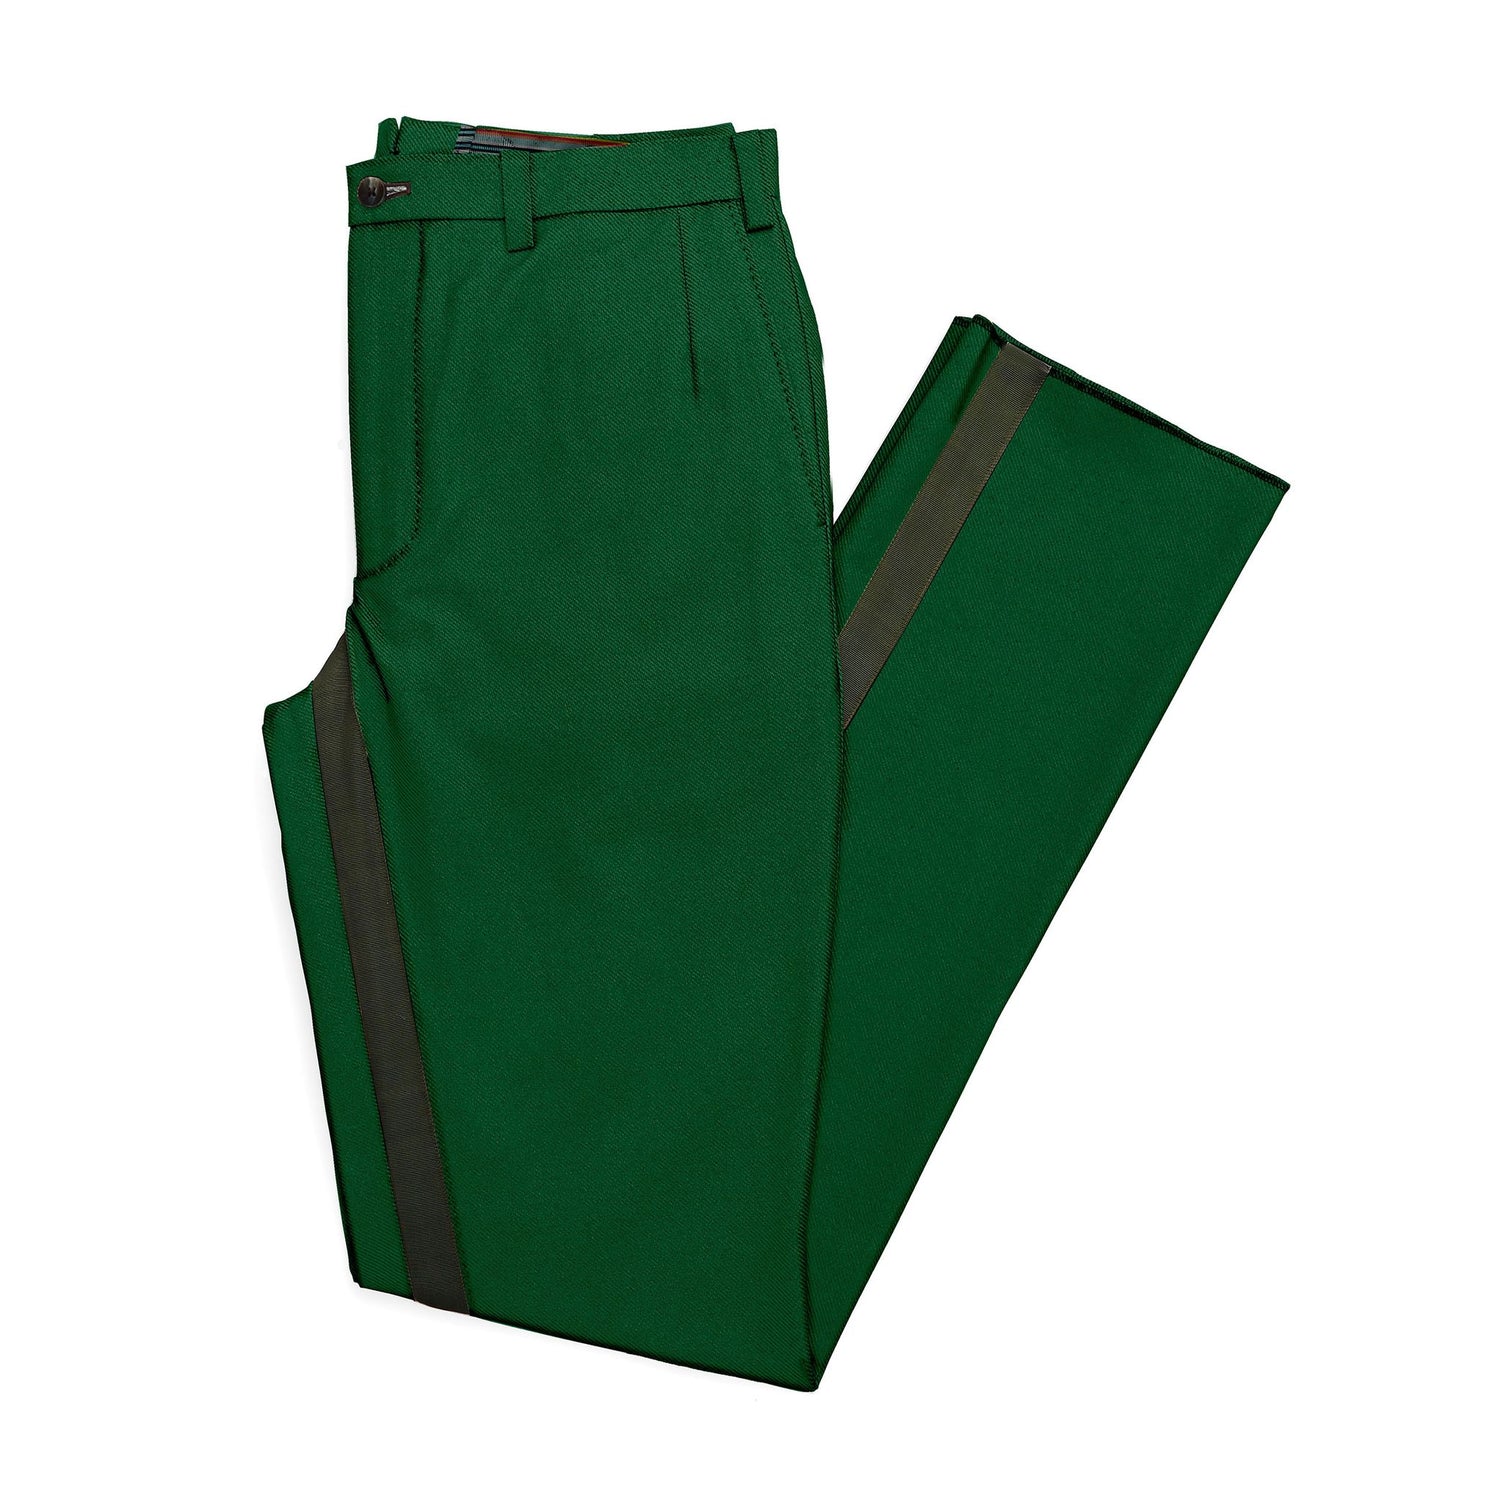 The Vintage Green Twill Trouser